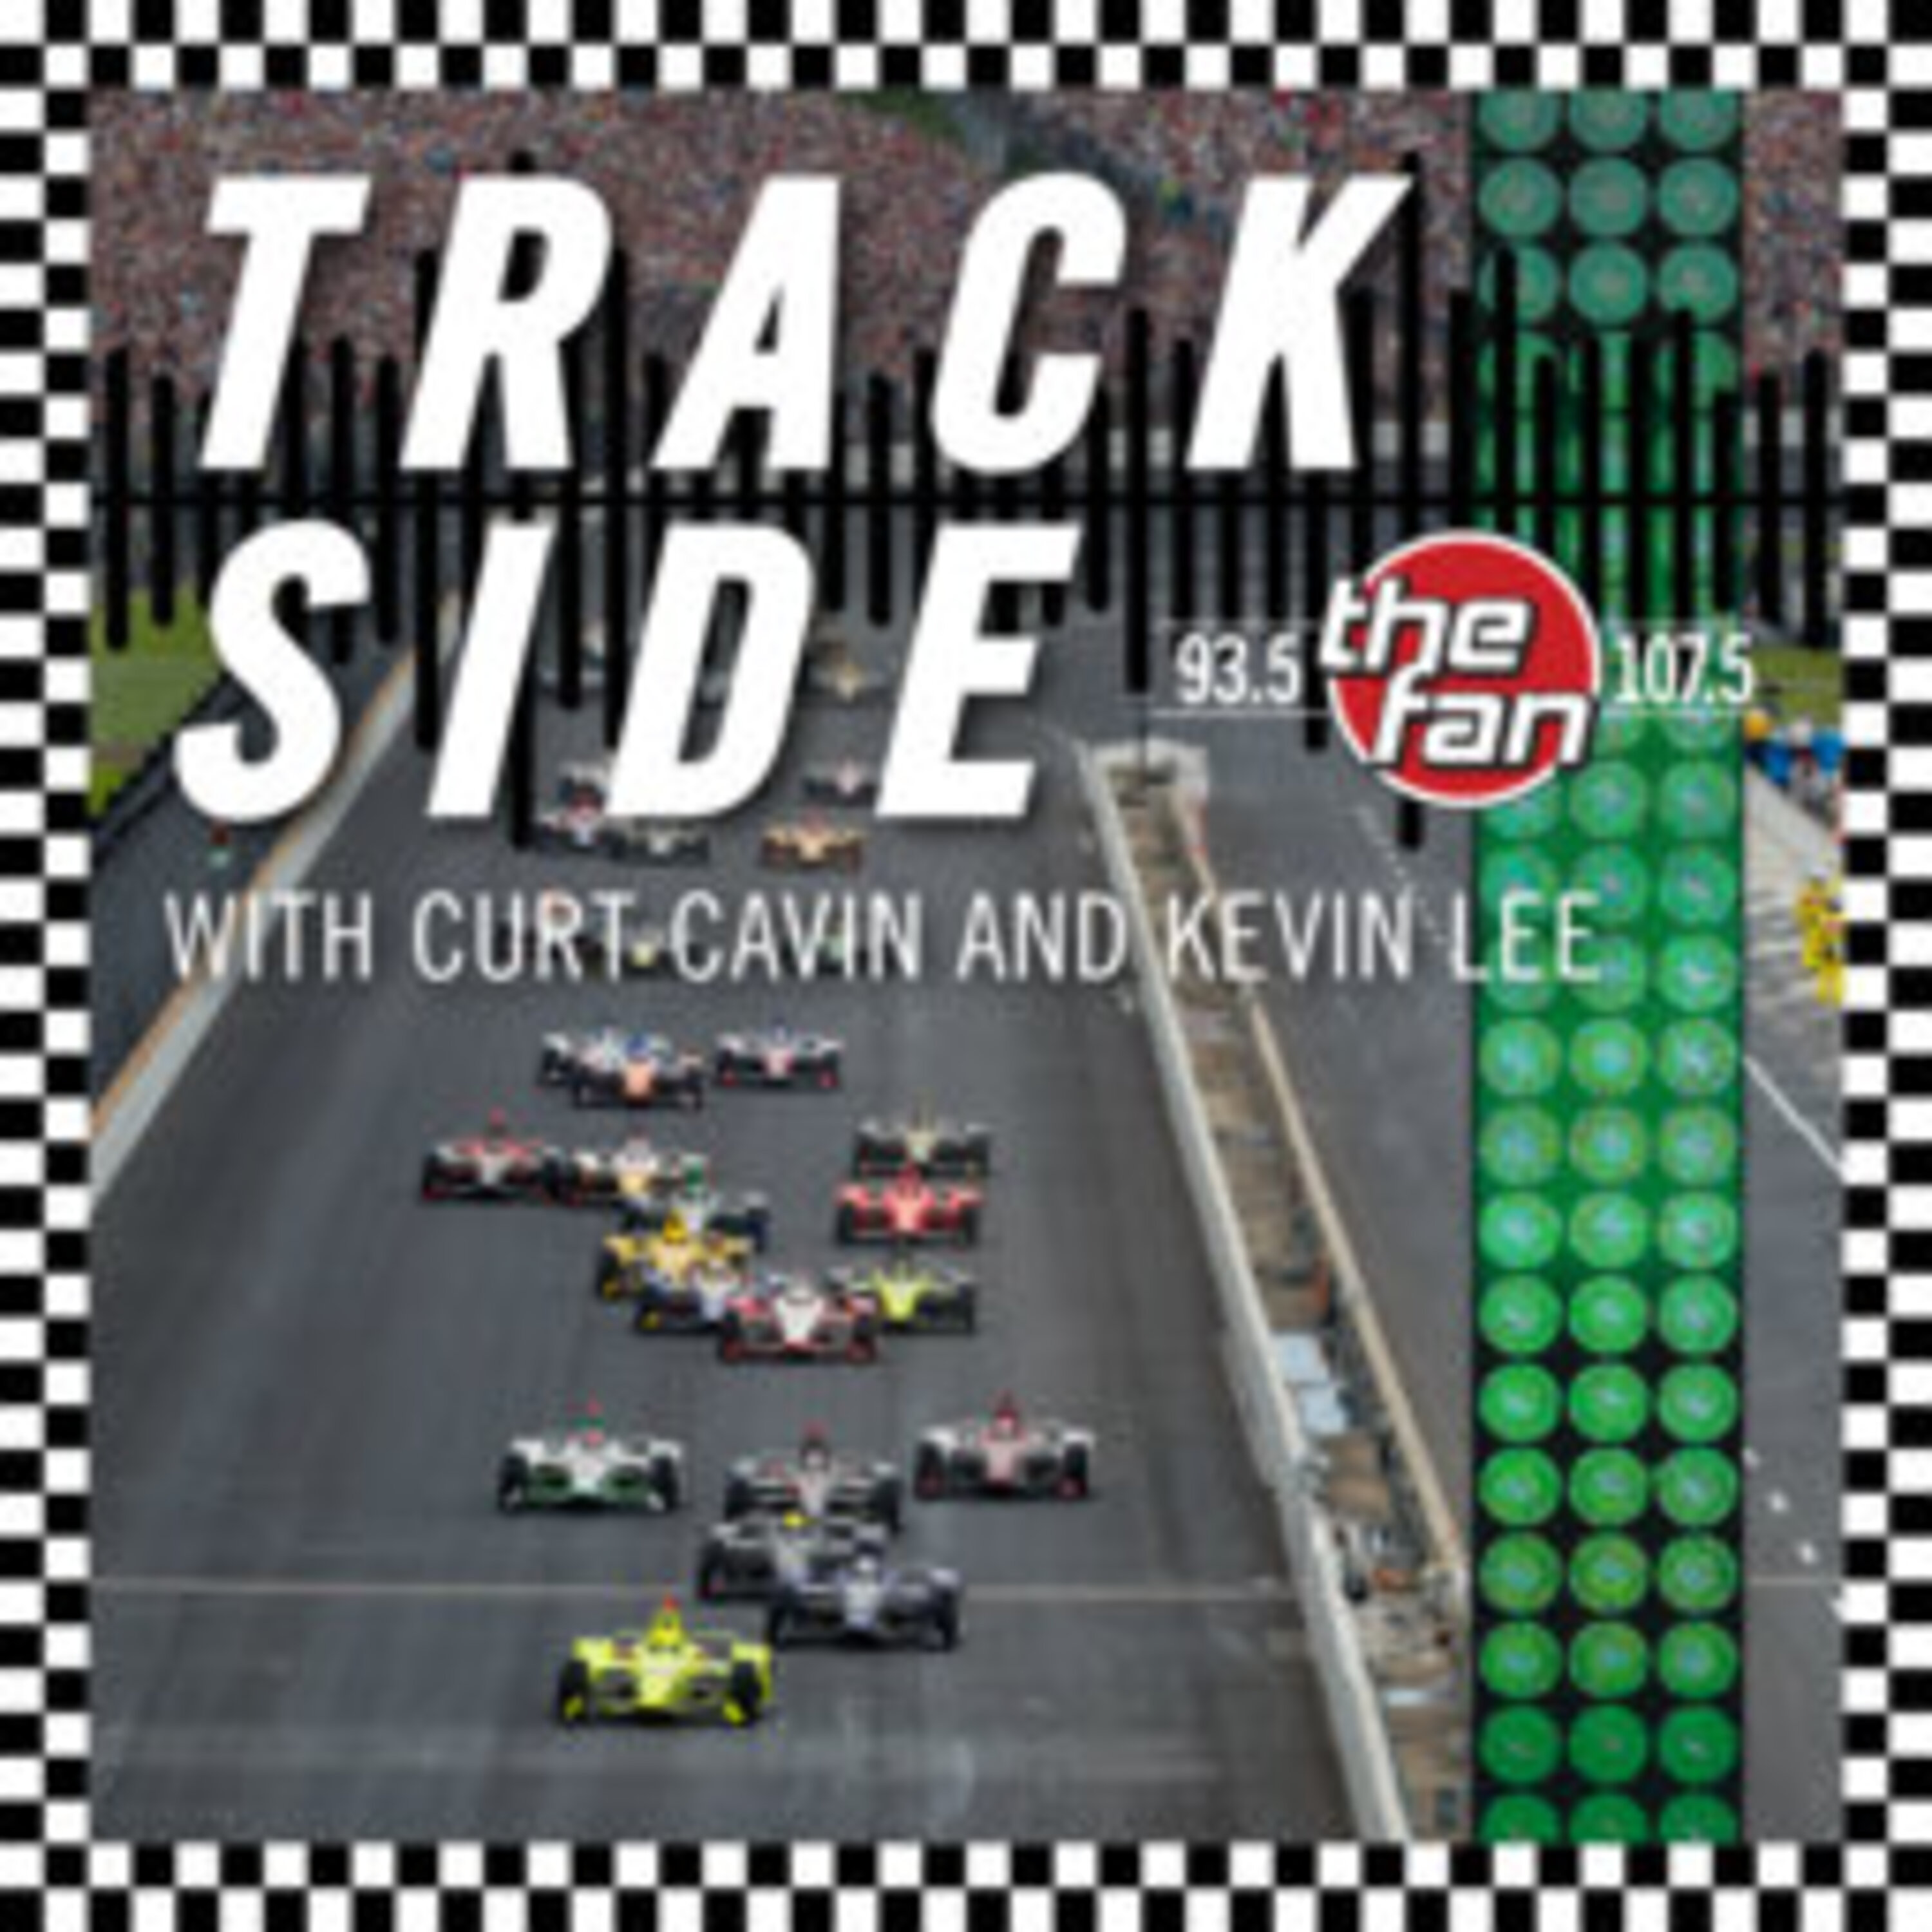 Curt and Kevin recap the race at Barber, talk about David Malukas being released from McLaren, and more!